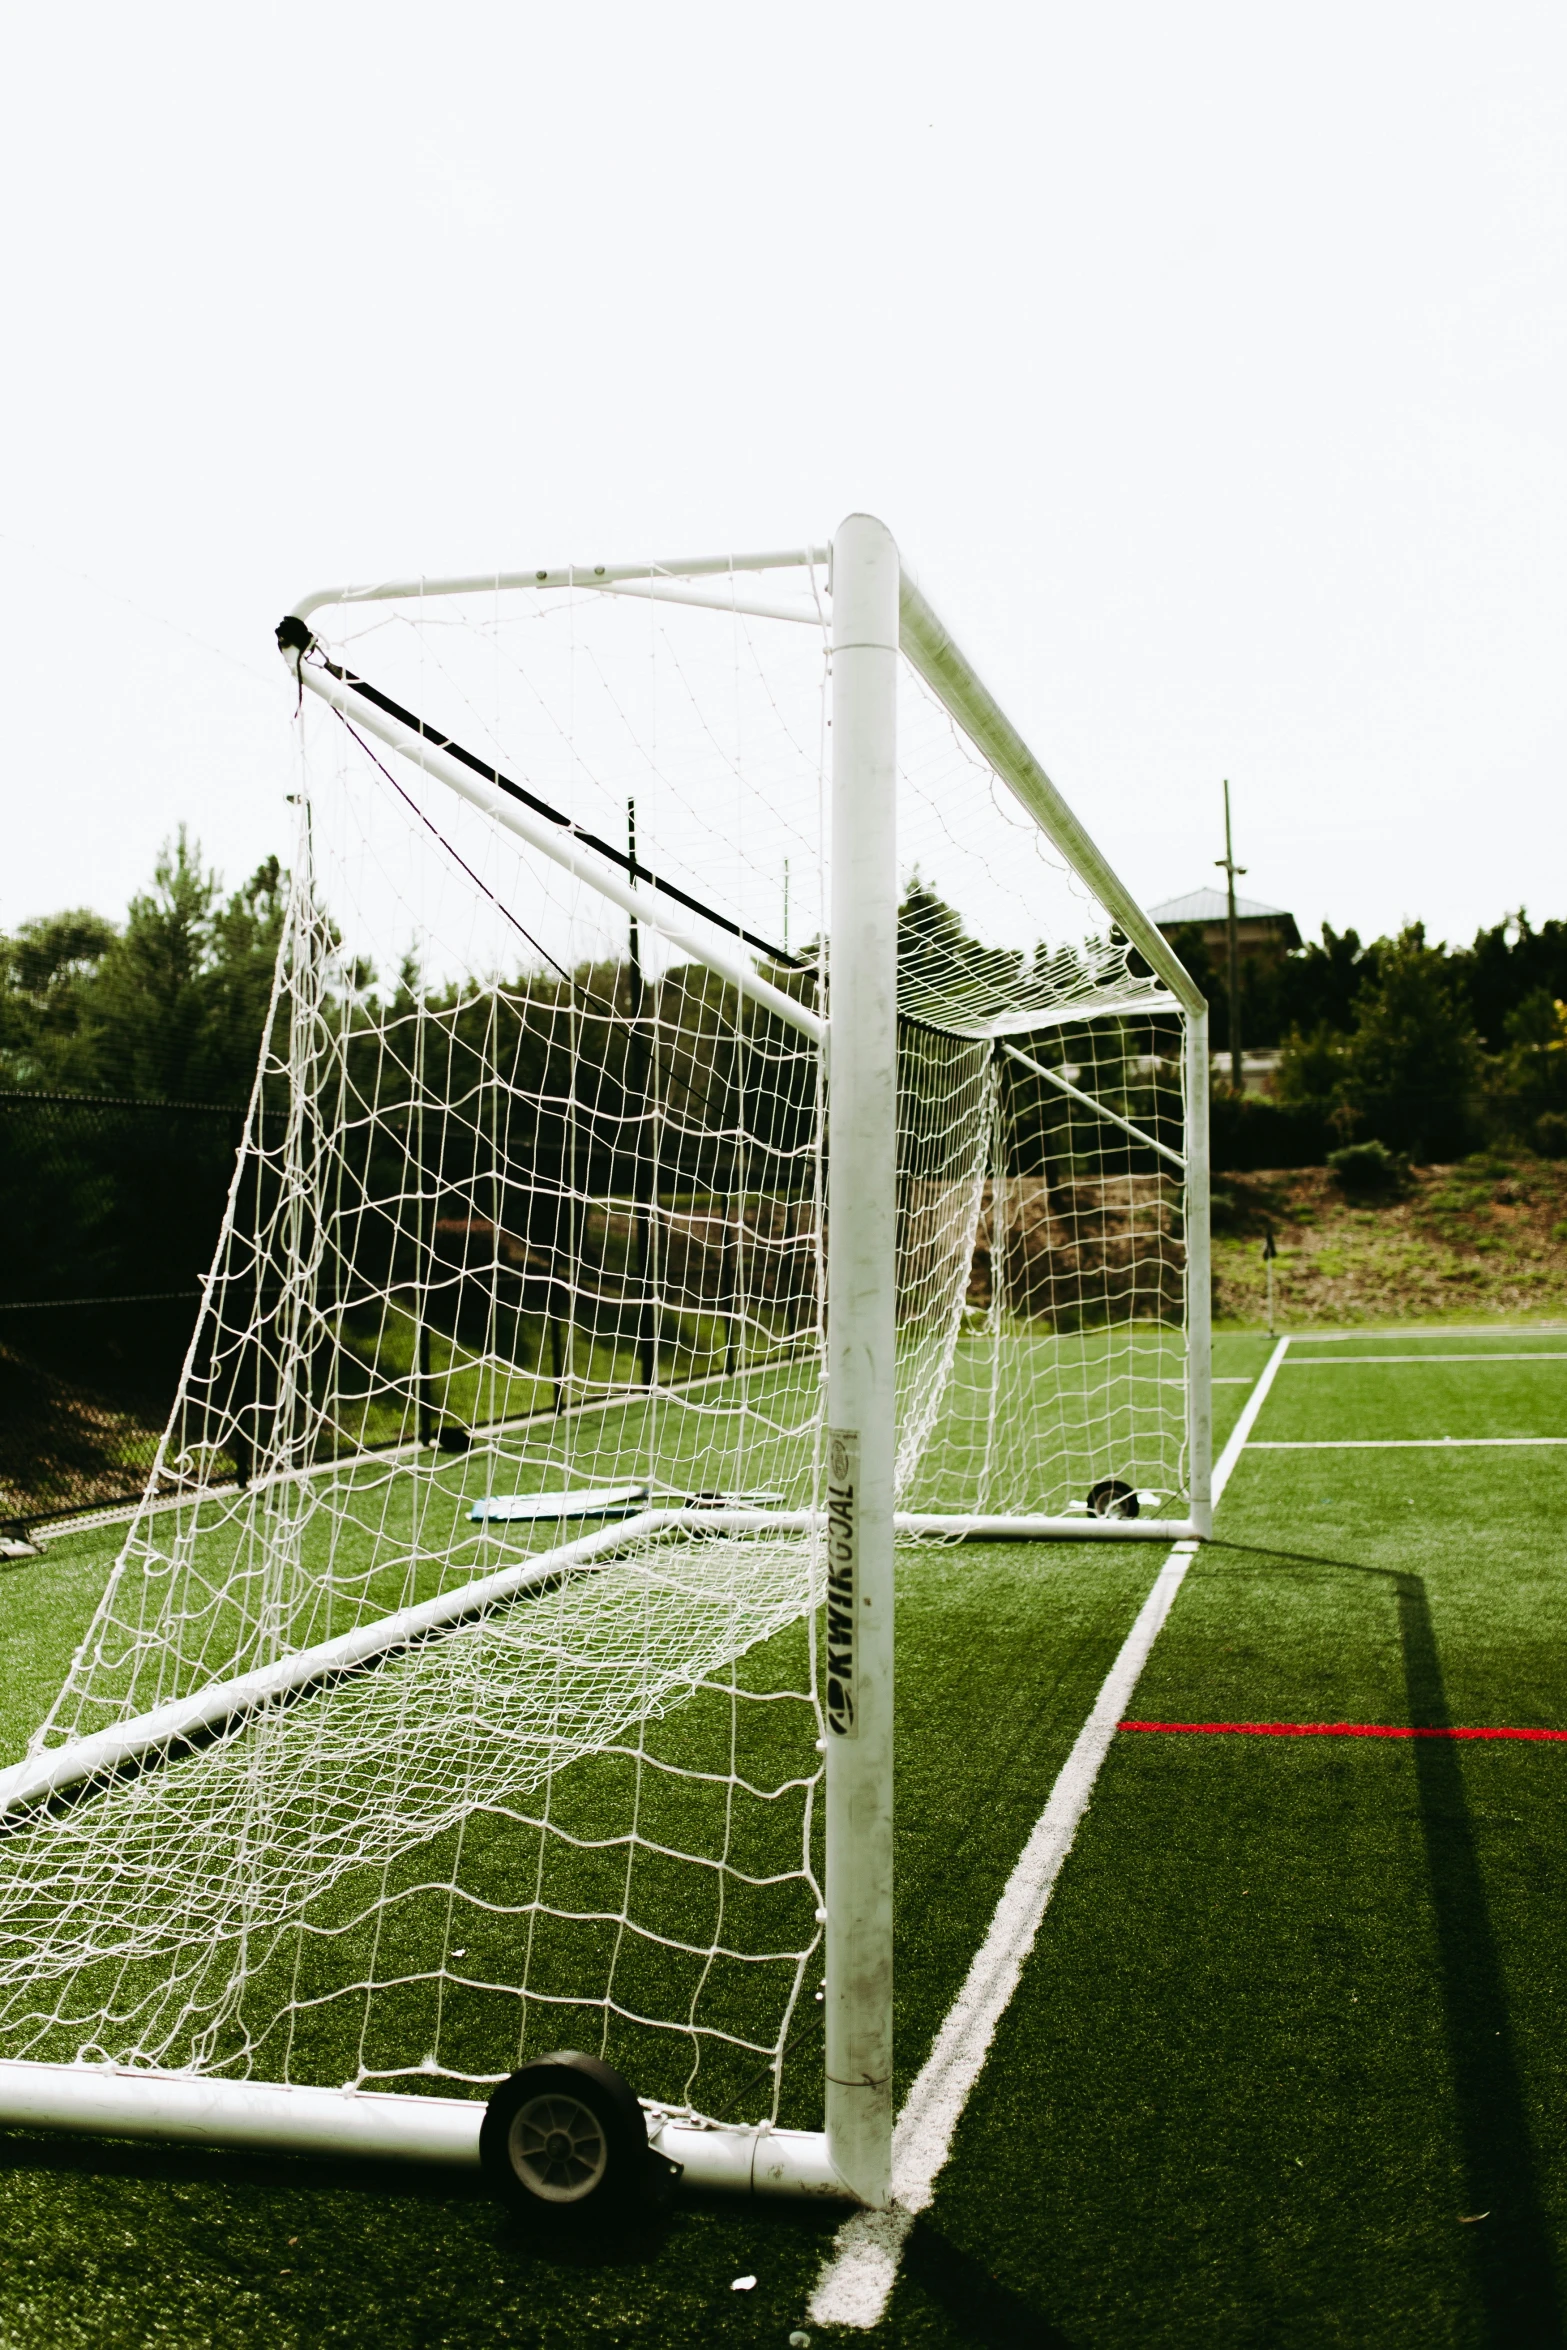 a soccer goal is set up on the field